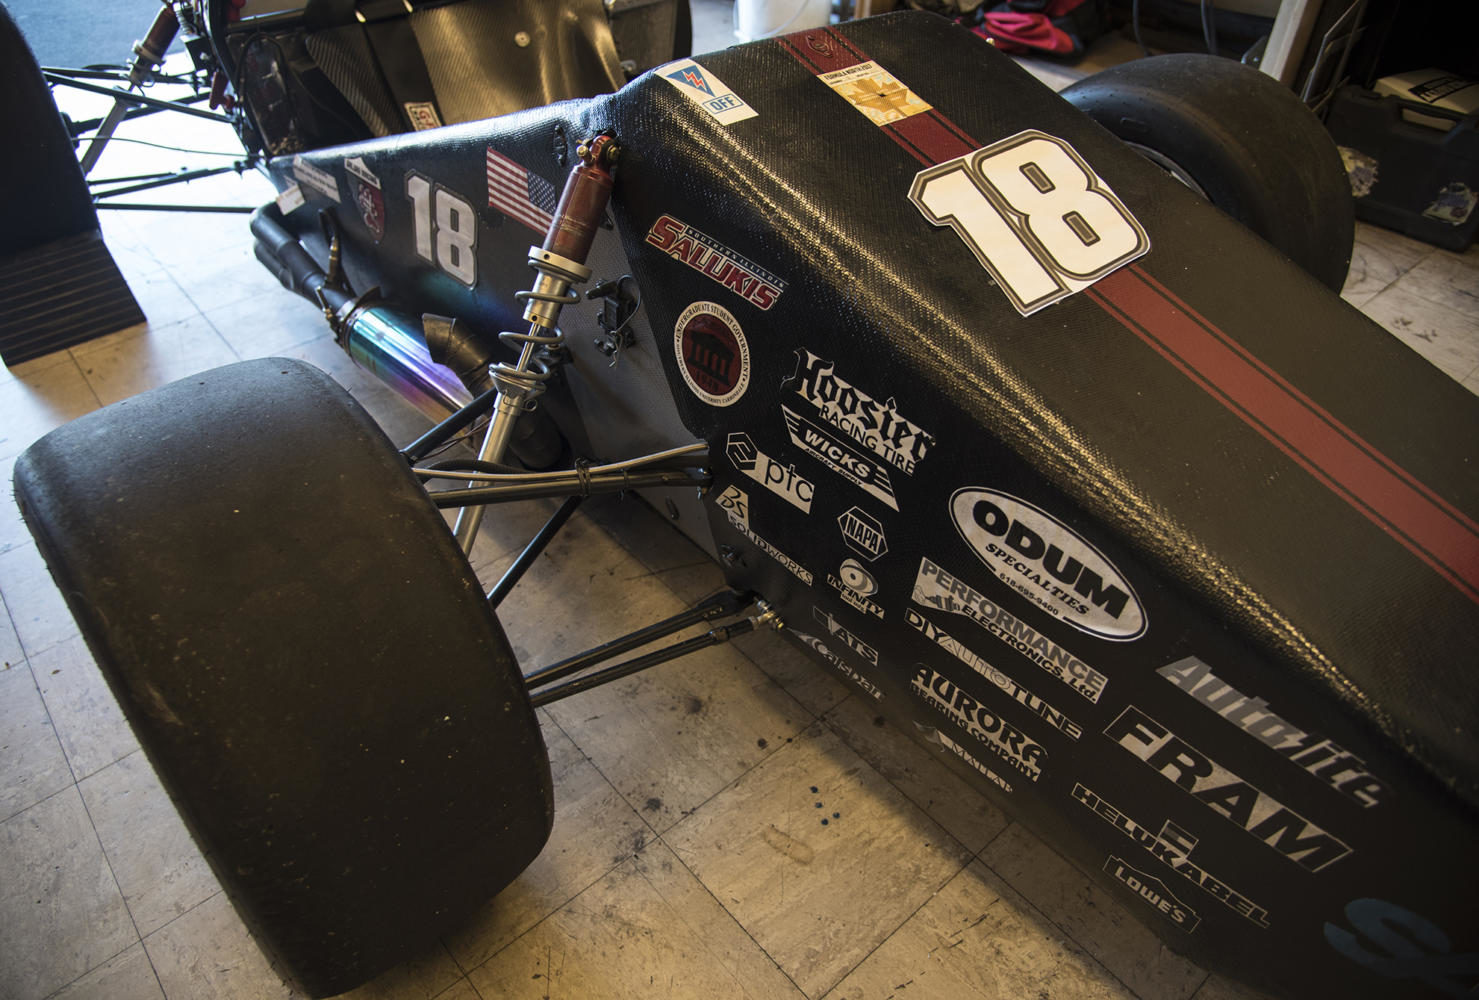 The hood of the race car Saluki KA displays sponsorship stickers in the shop Friday, Sept. 15, 2017, in the shop in the engineering building. (Athena Chrysanthou | @Chrysant1Athena)